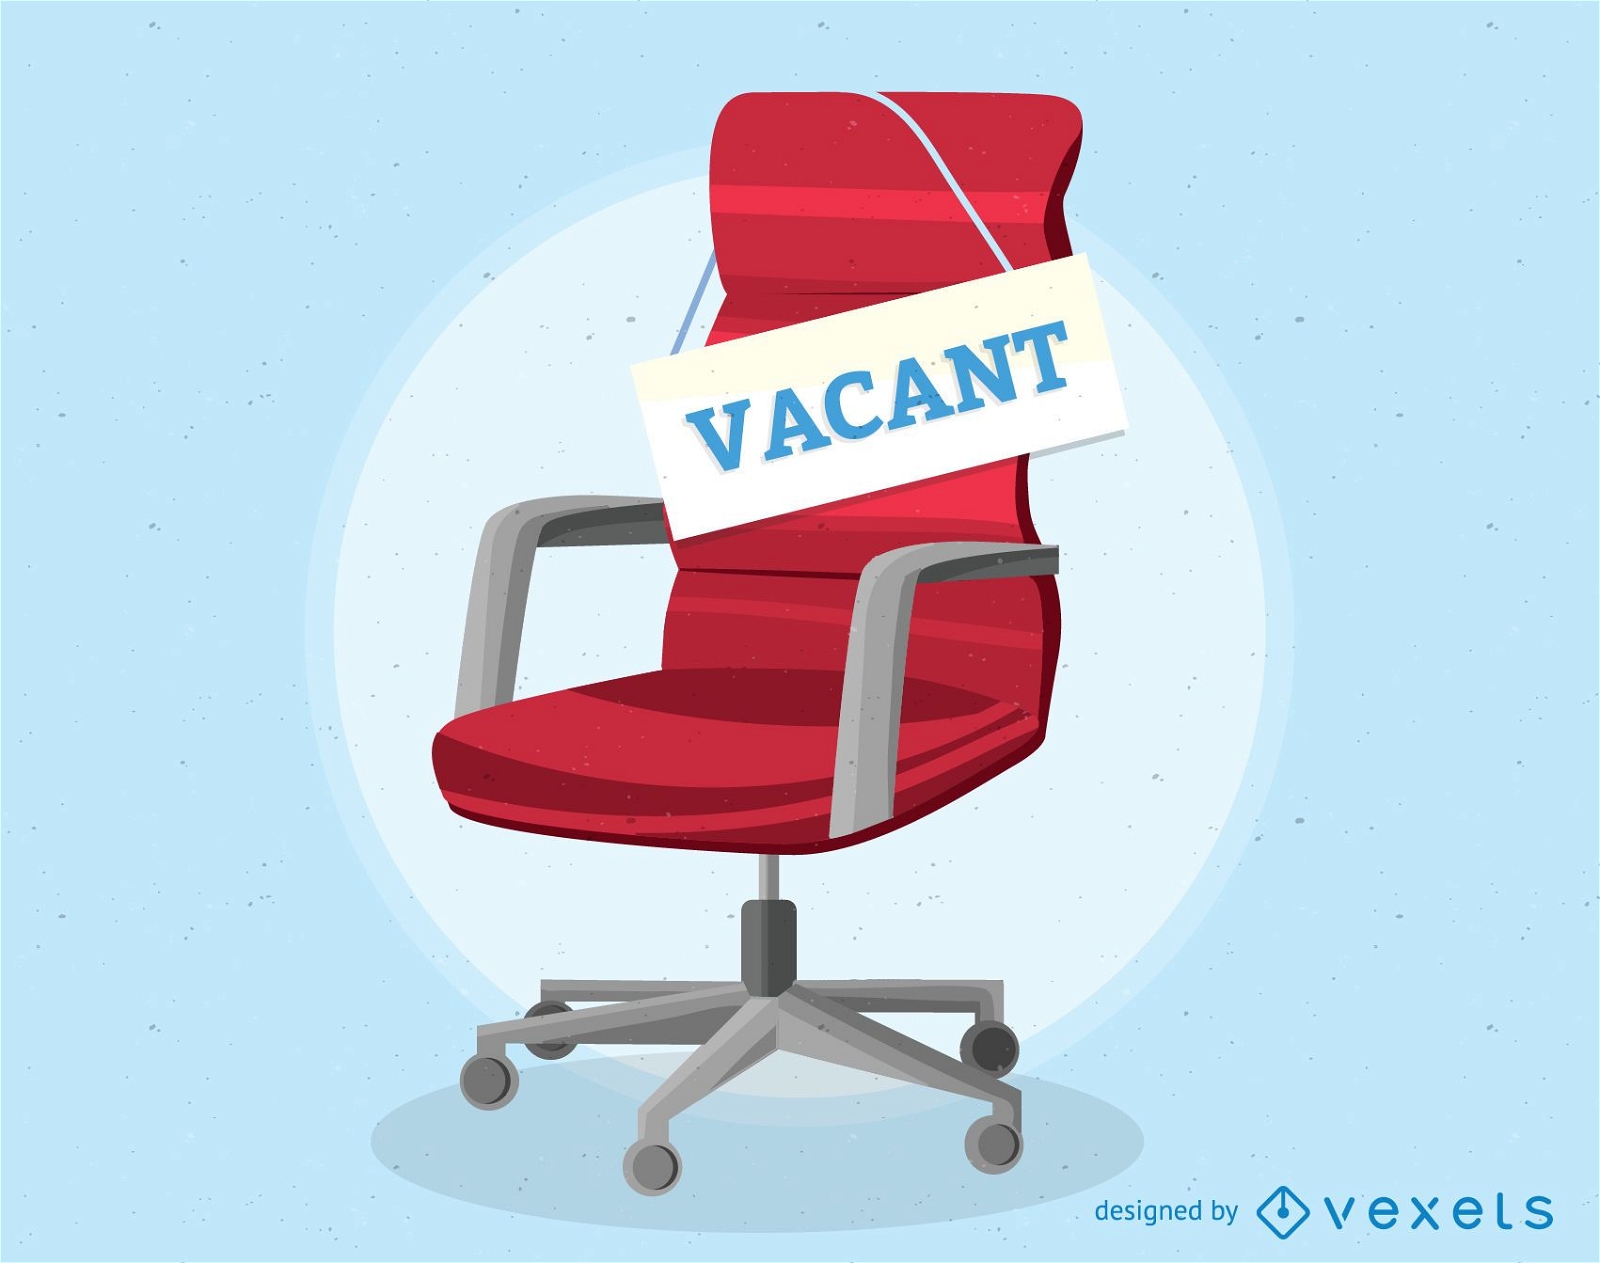 Vacant office chair illustration